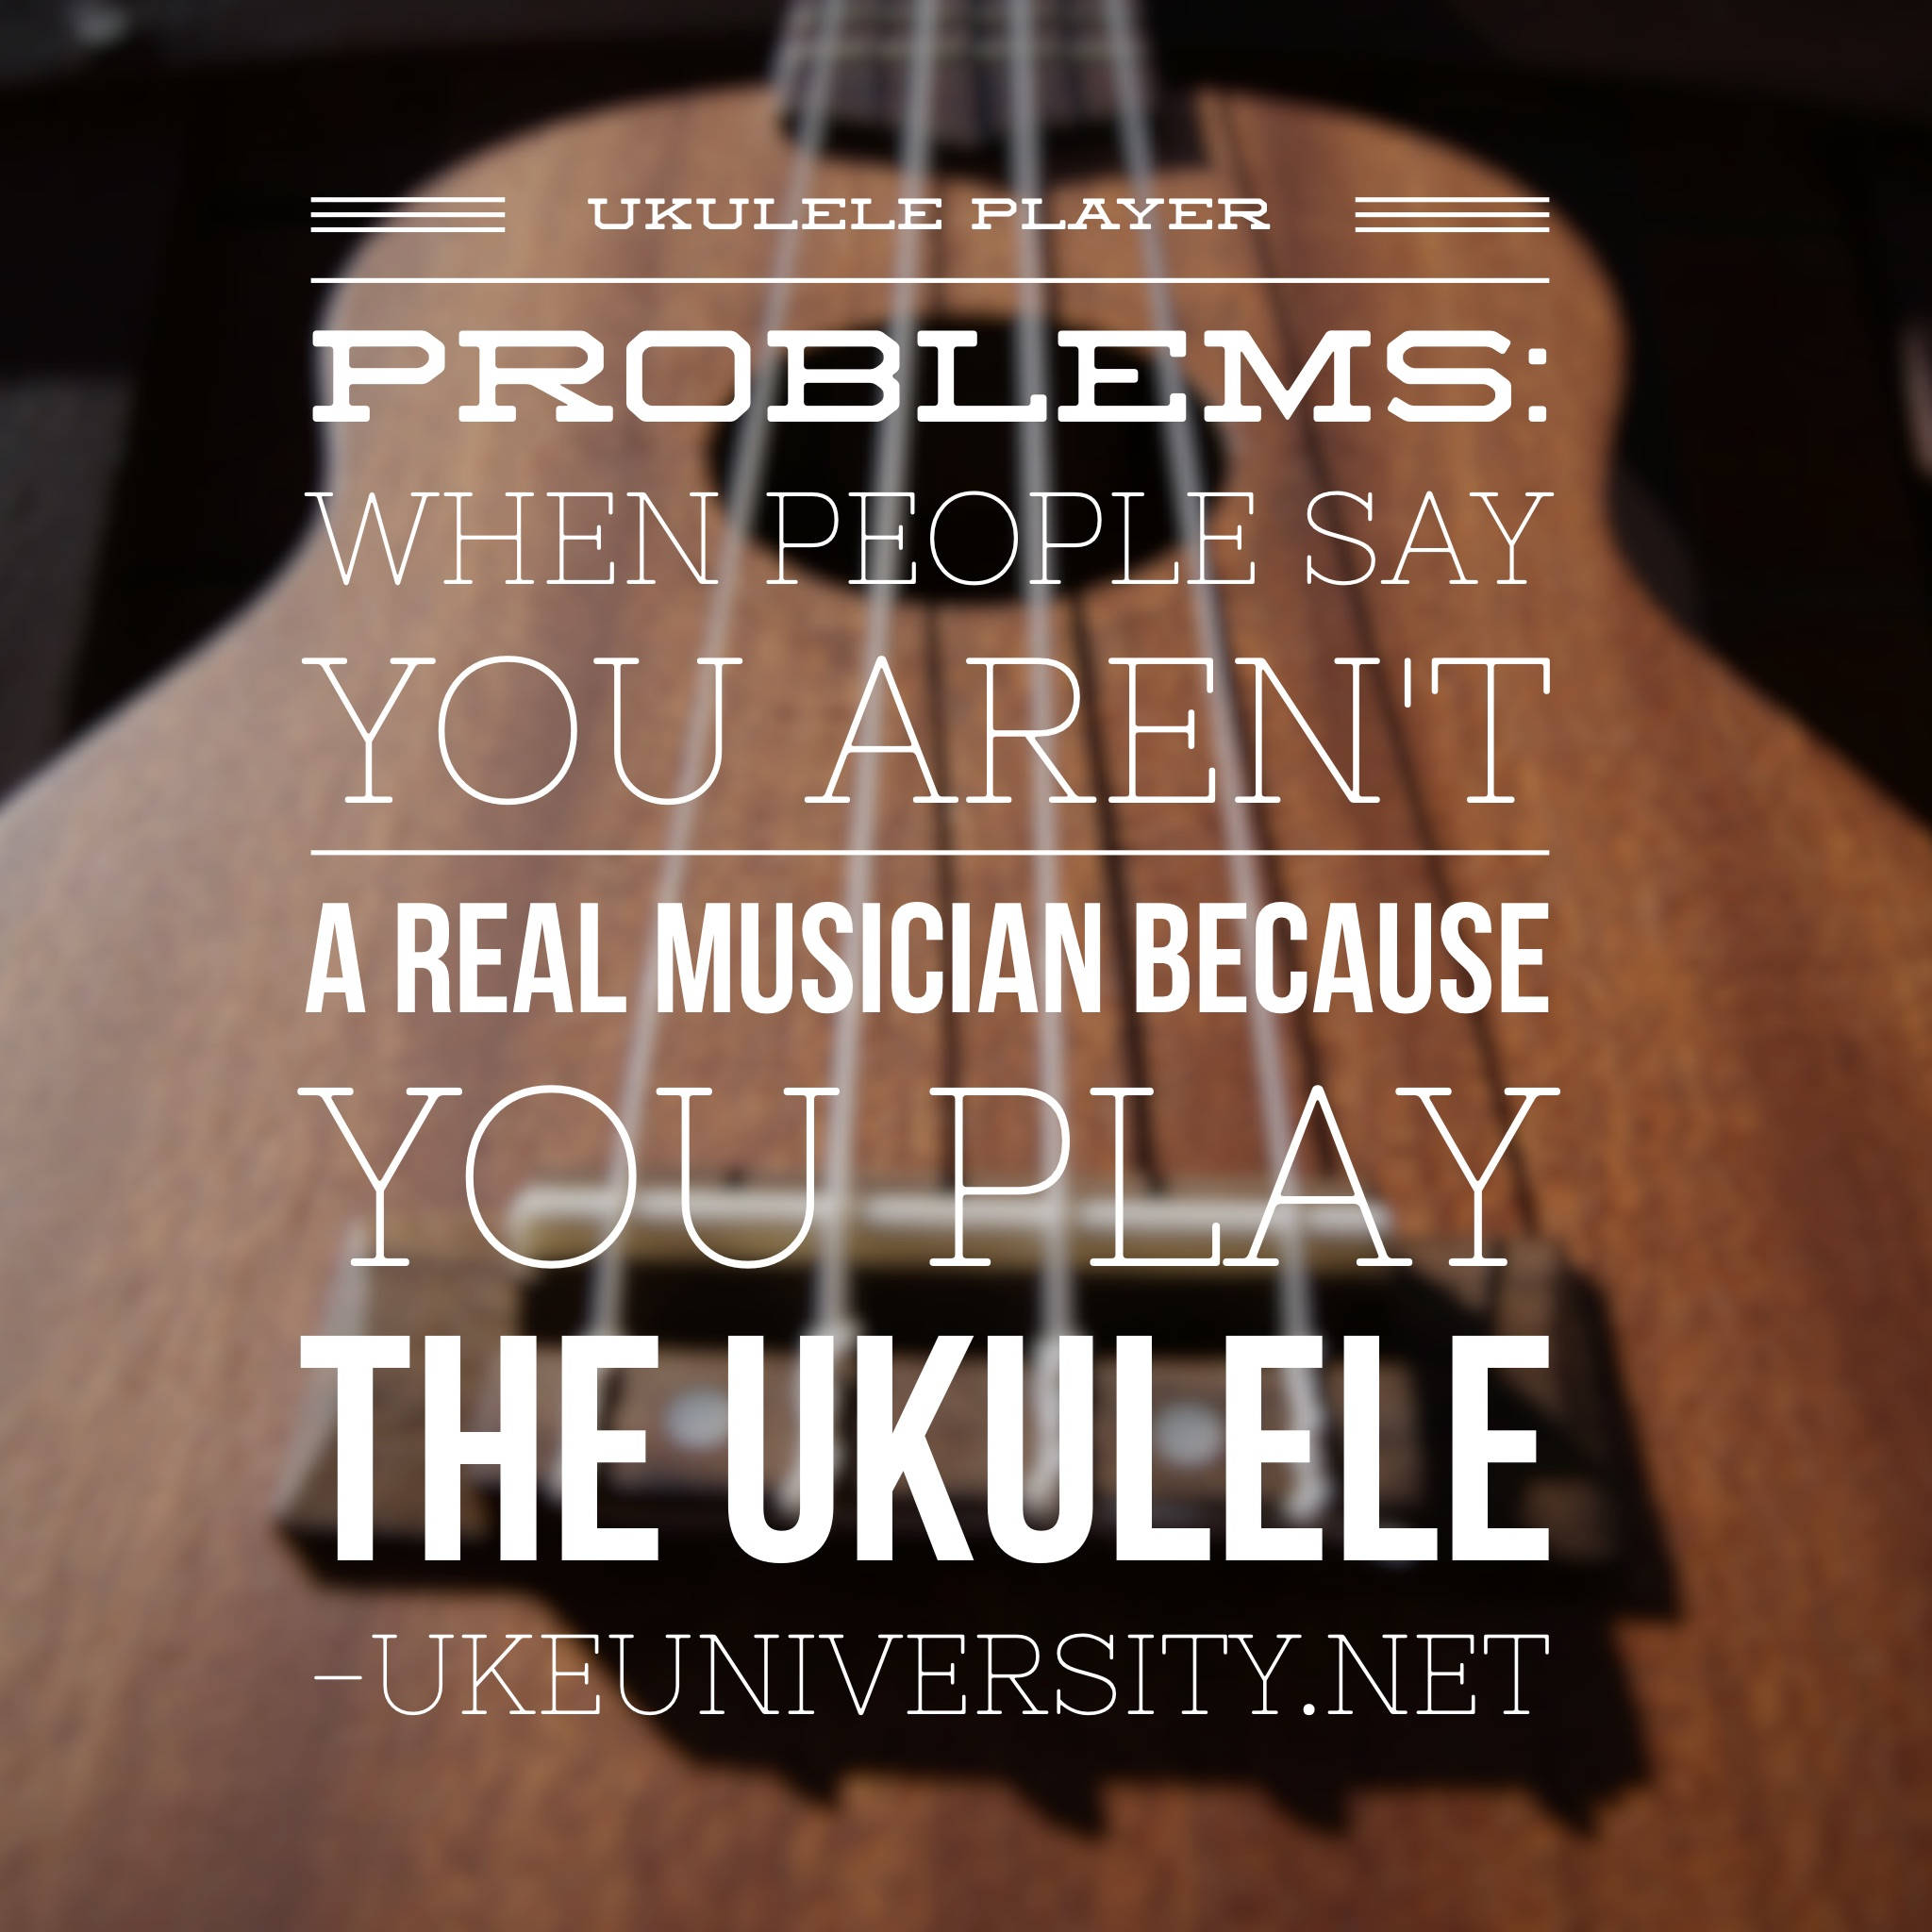 a picture of a ukulele with the caption ukulele player problems: when people say you aren't a real muscian because you play the ukulele